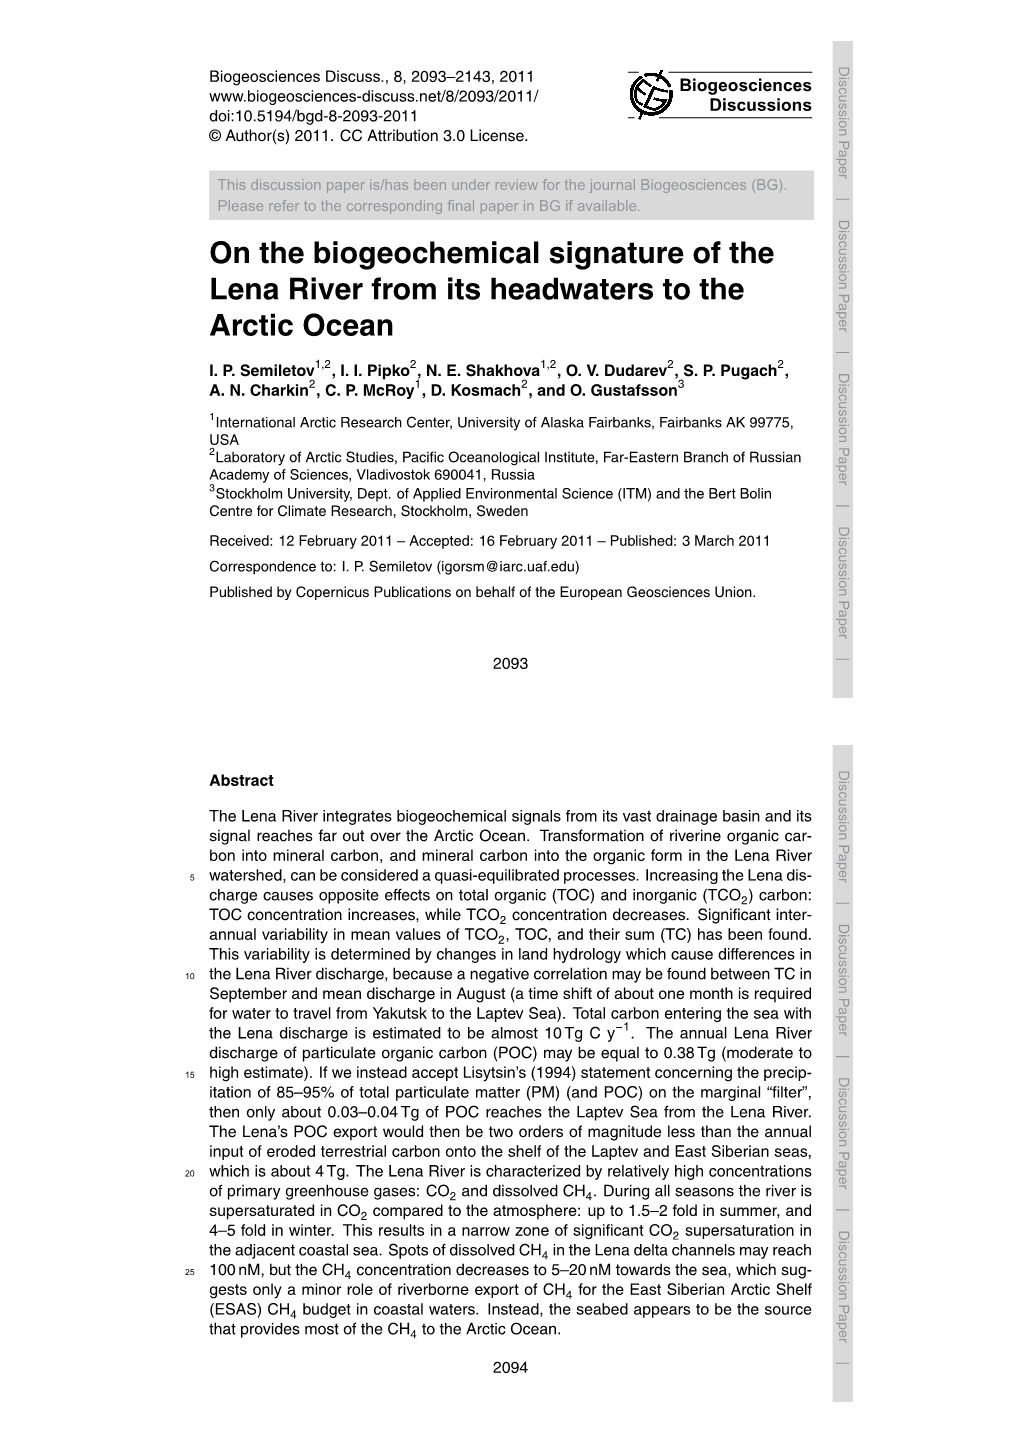 On the Biogeochemical Signature of the Lena River from Its Headwaters